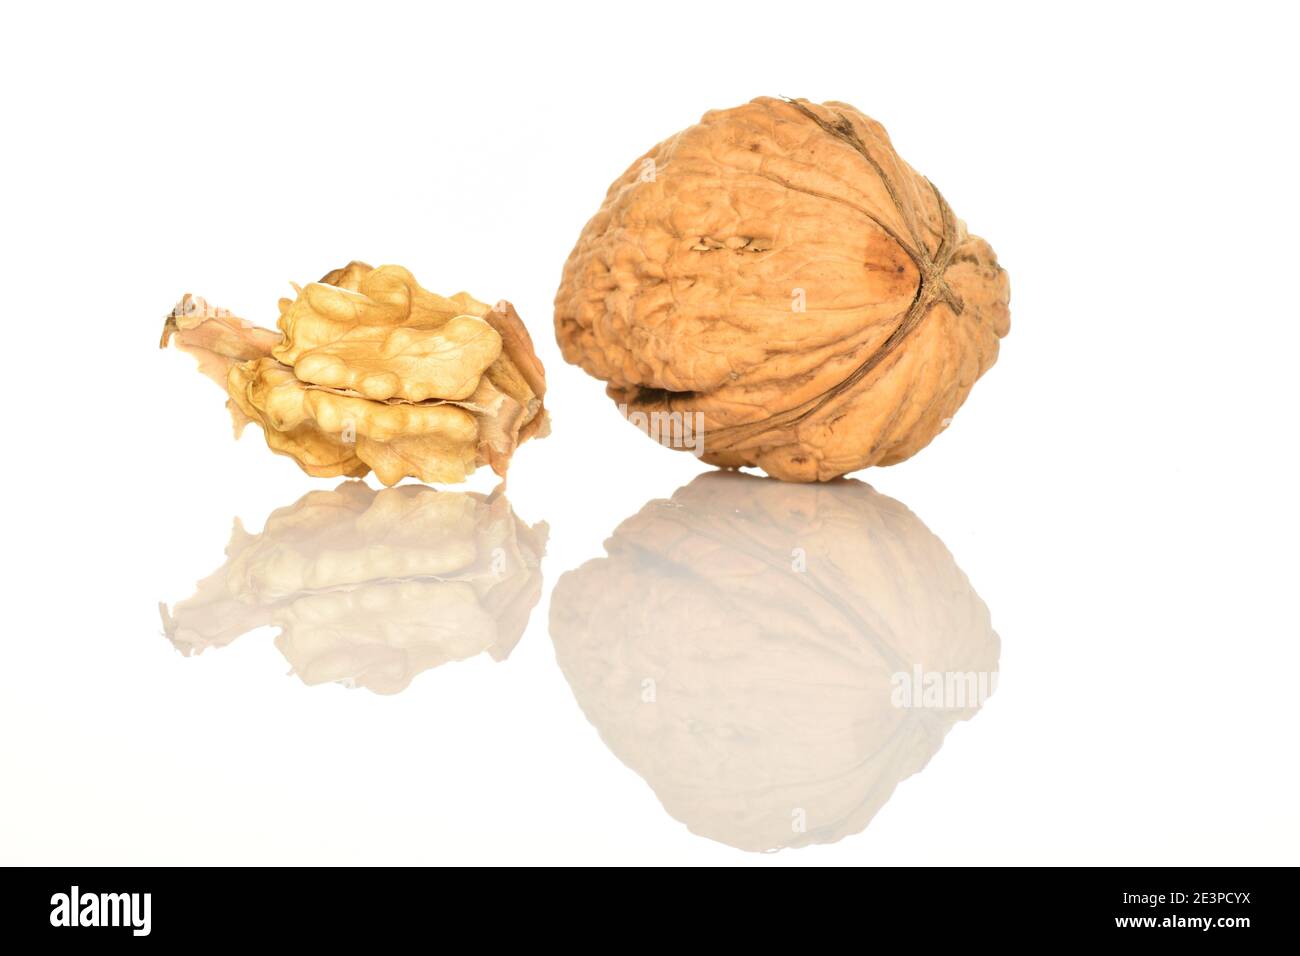 One light yellow ripe tasty peeled walnut kernel and one whole dark brown nut, on a white background. Stock Photo